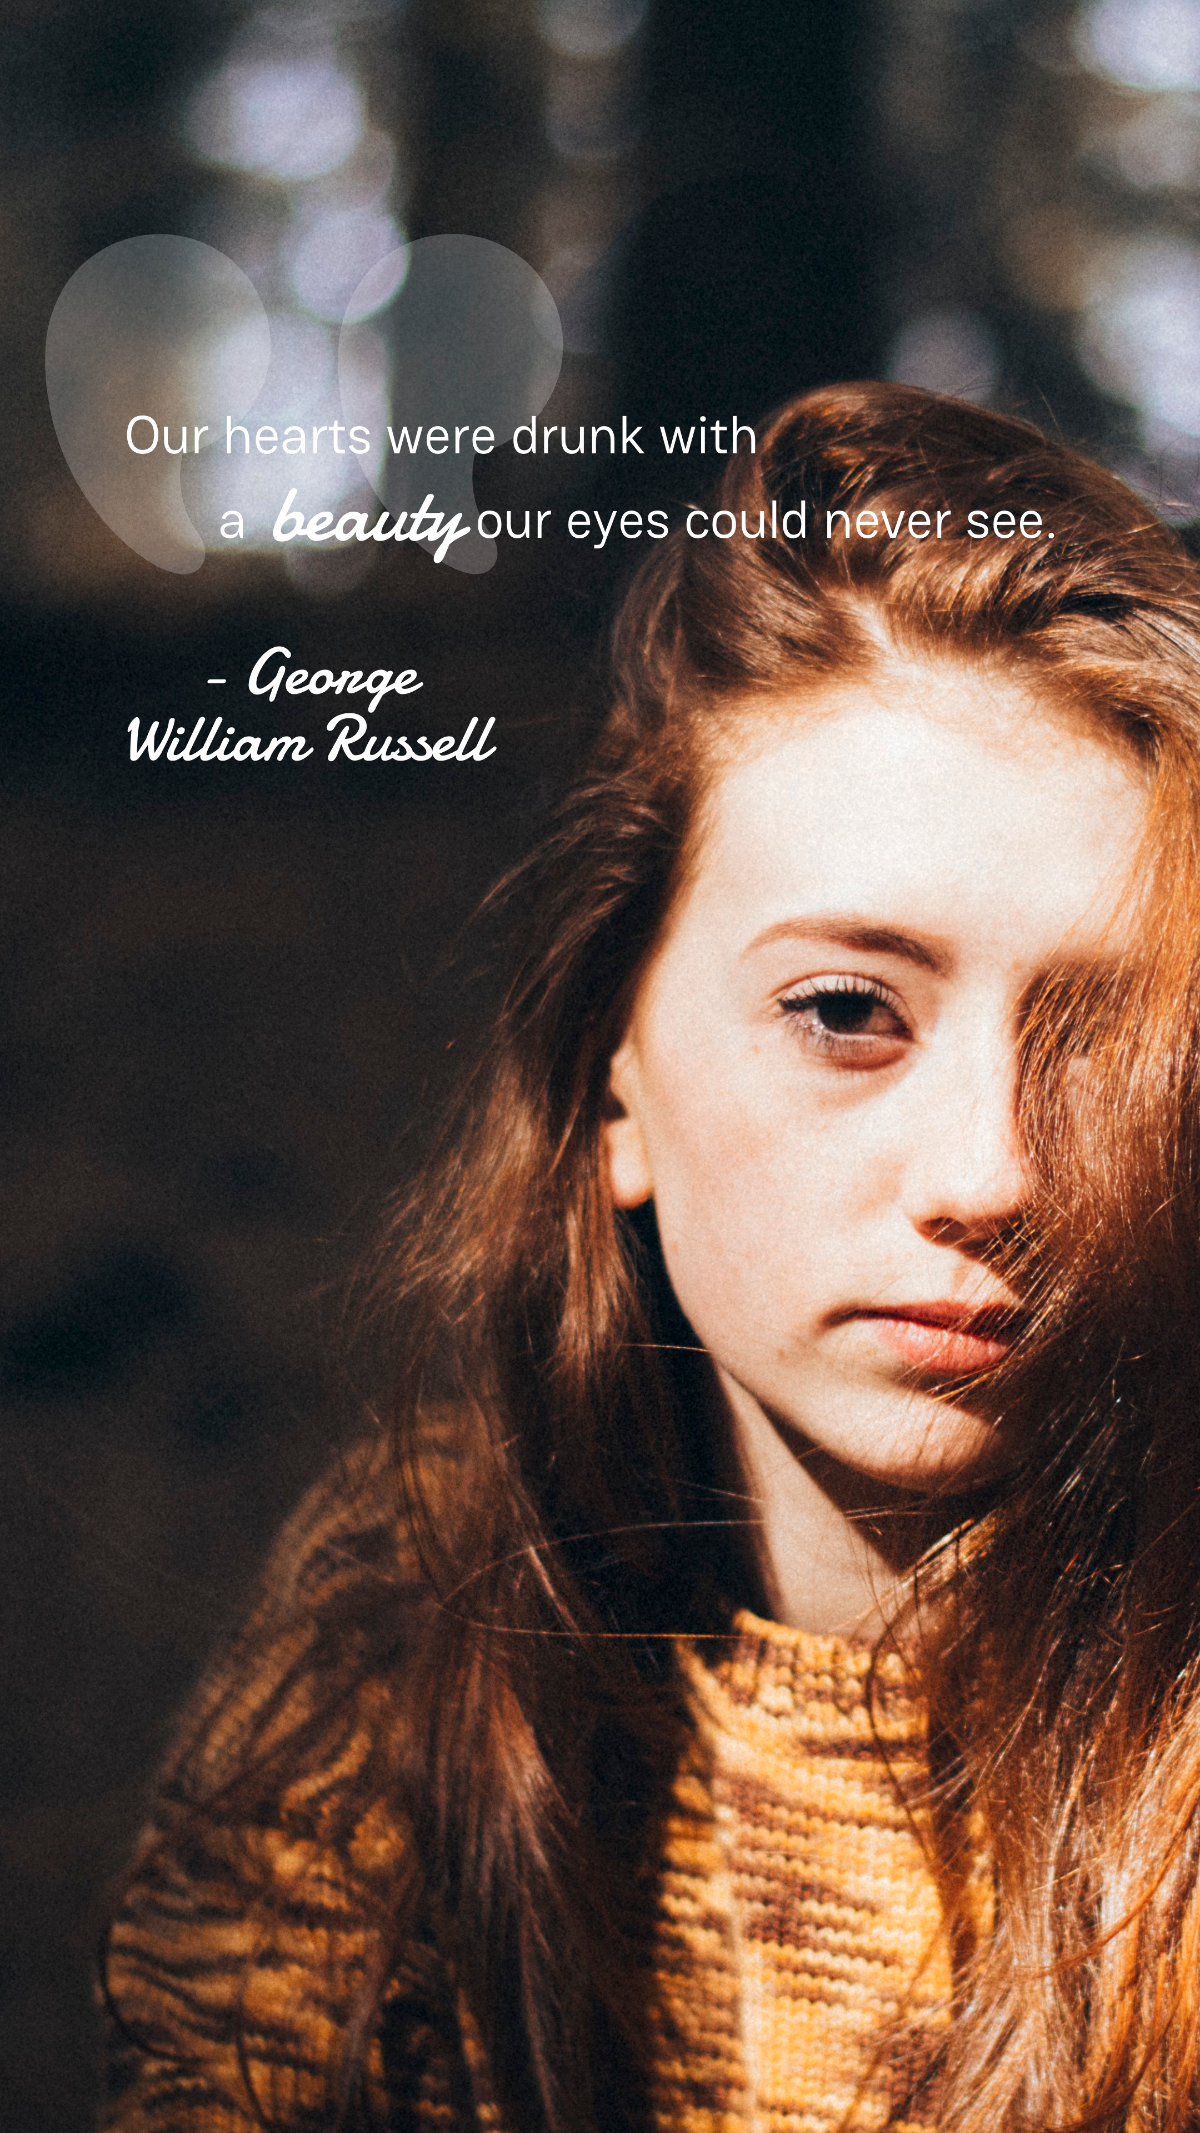 George William Russell - Our hearts were drunk with a beauty Our eyes could never see. Template